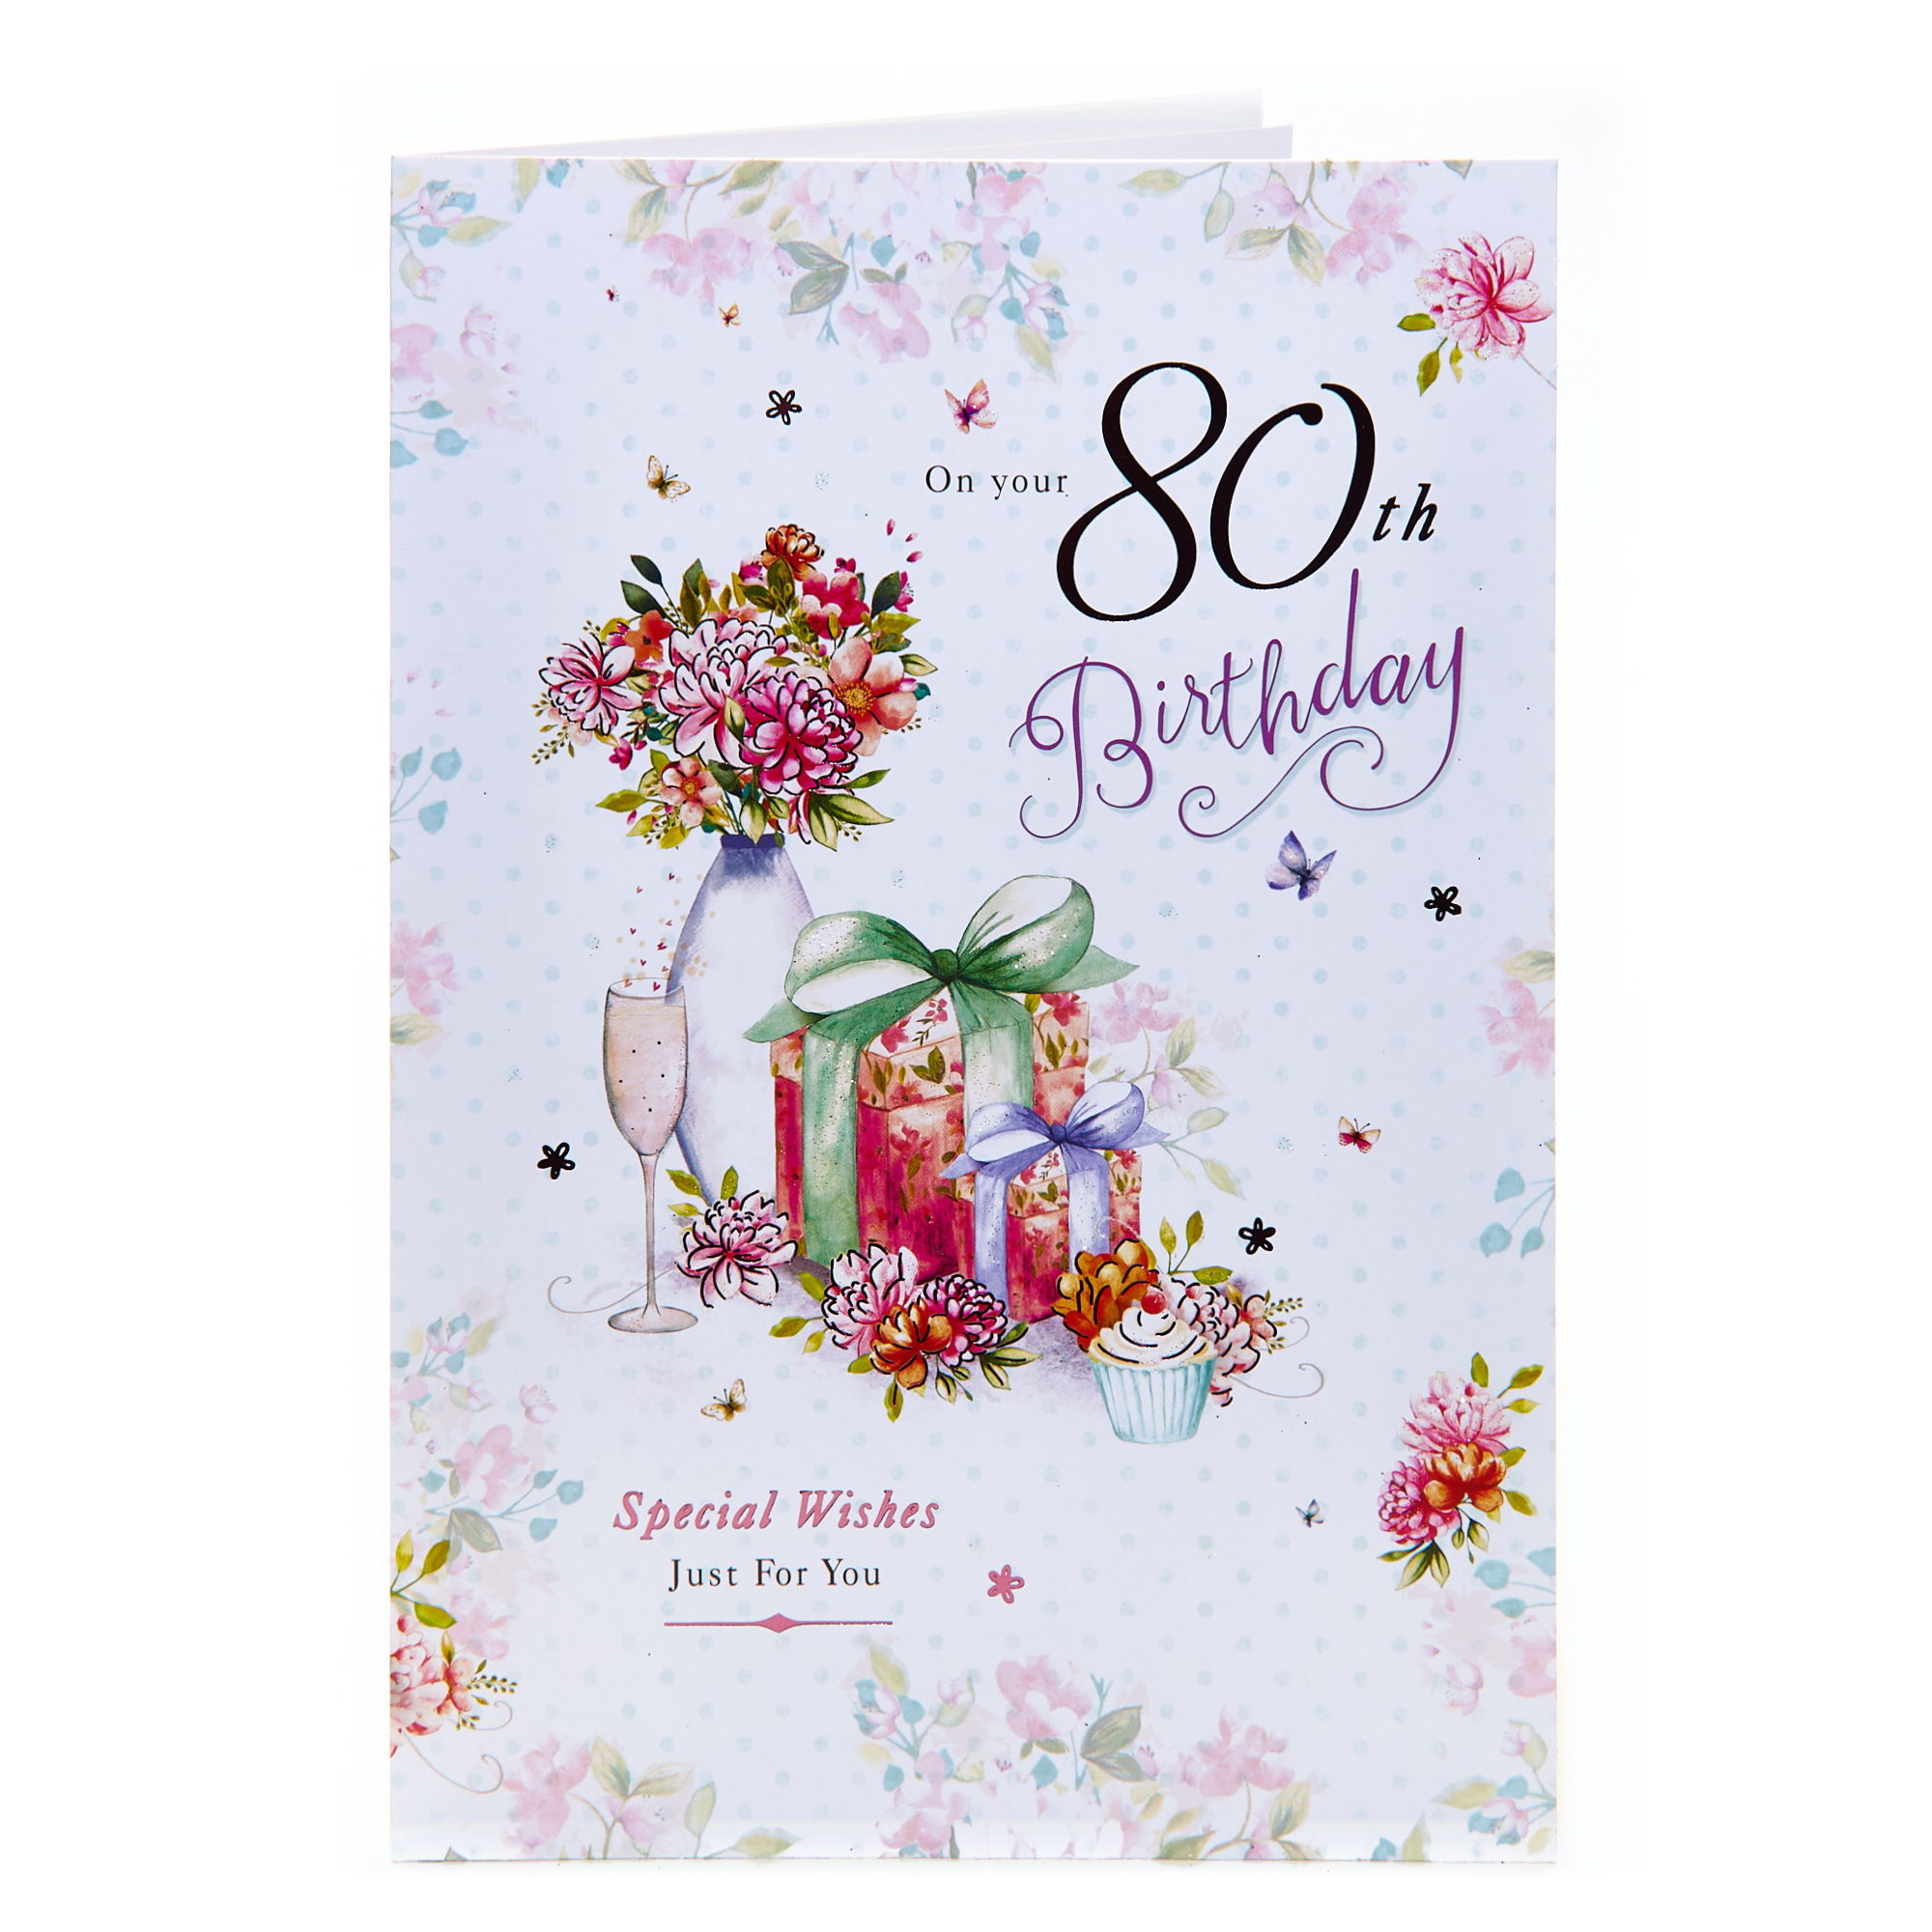 what-to-write-in-80th-birthday-card-birthday-ideas